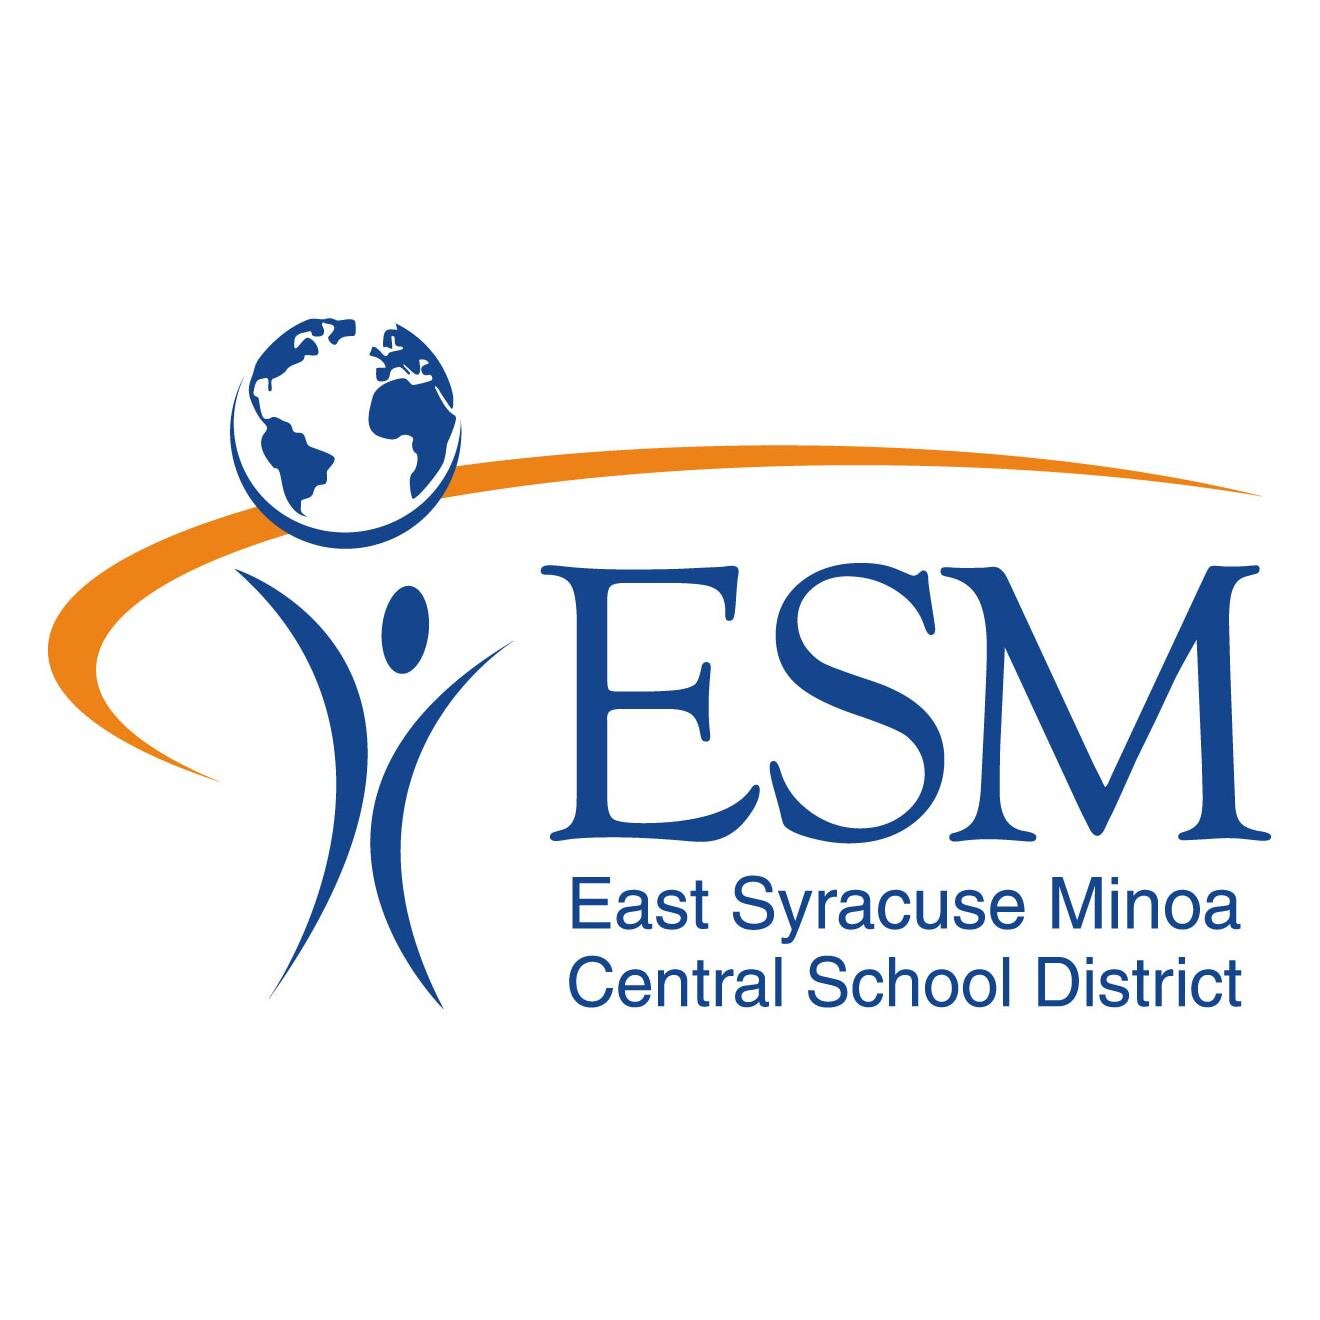 This is the official X-Twitter account for the East Syracuse Minoa Central School District. We are a Pre-K to Grade 12 district in Central NY.